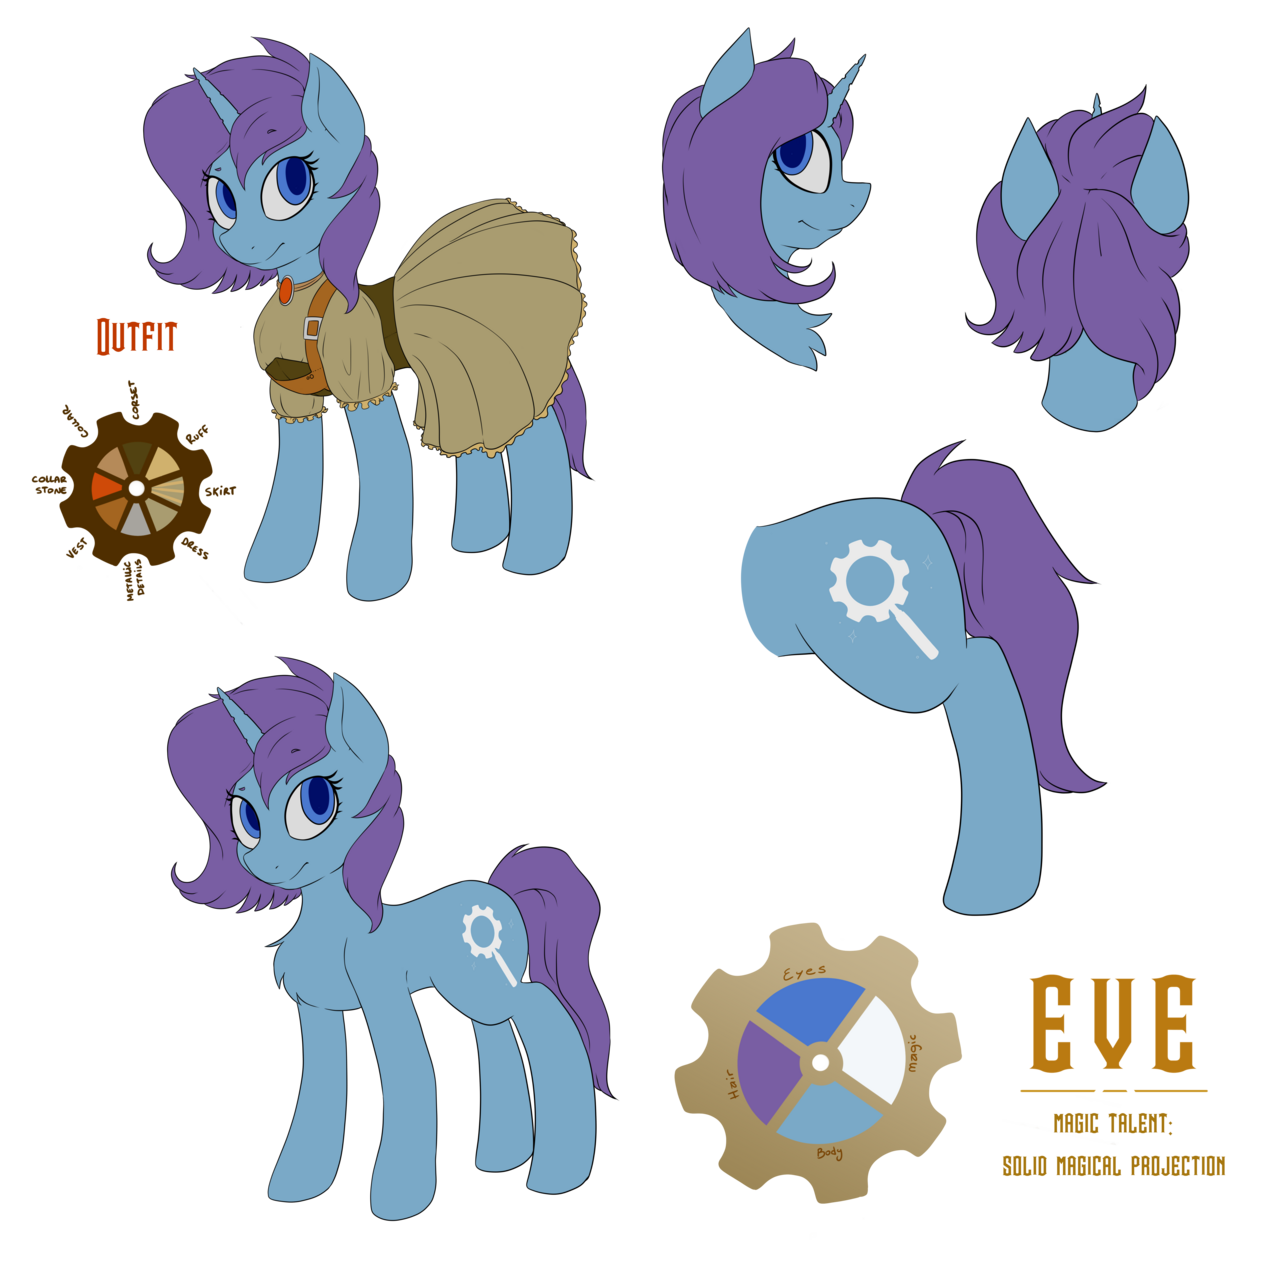 Eve steampunk version reference sheet, casual wear (flat color)